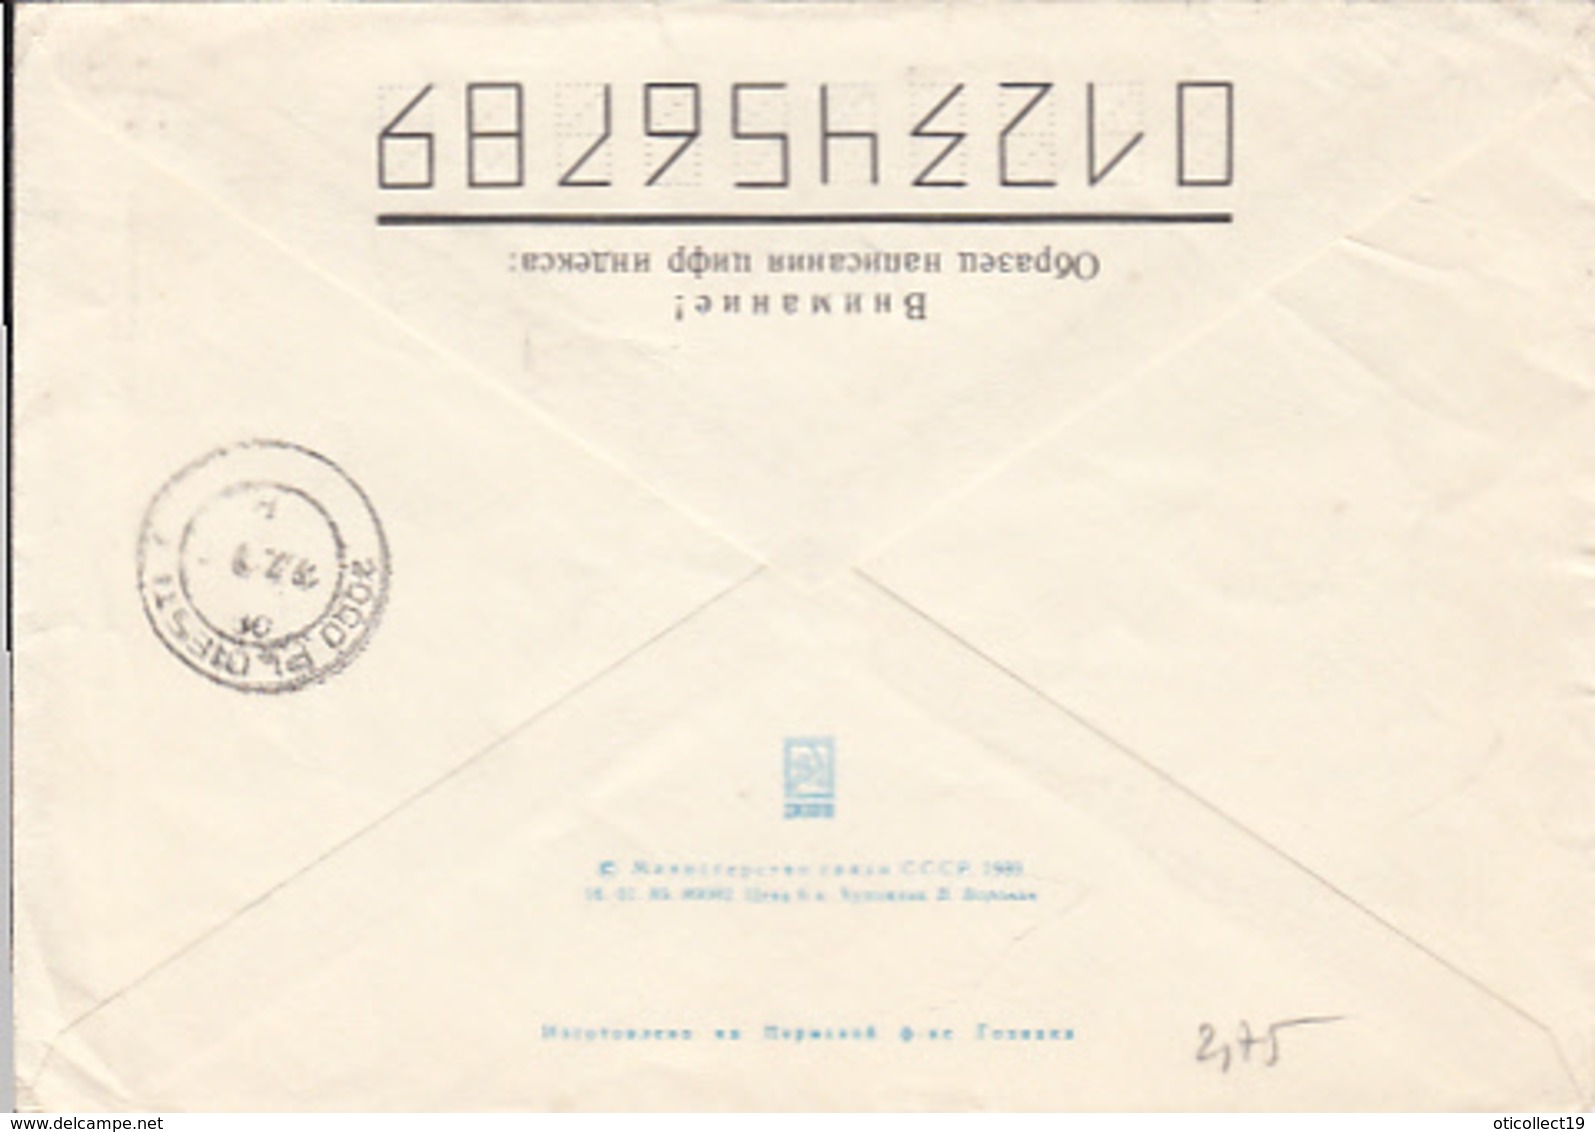 POLAT FLIGHT, MOSCOW-GREENLAND ROUTE, CREW, COVER STATIONERY, 1989, RUSSIA - Vuelos Polares